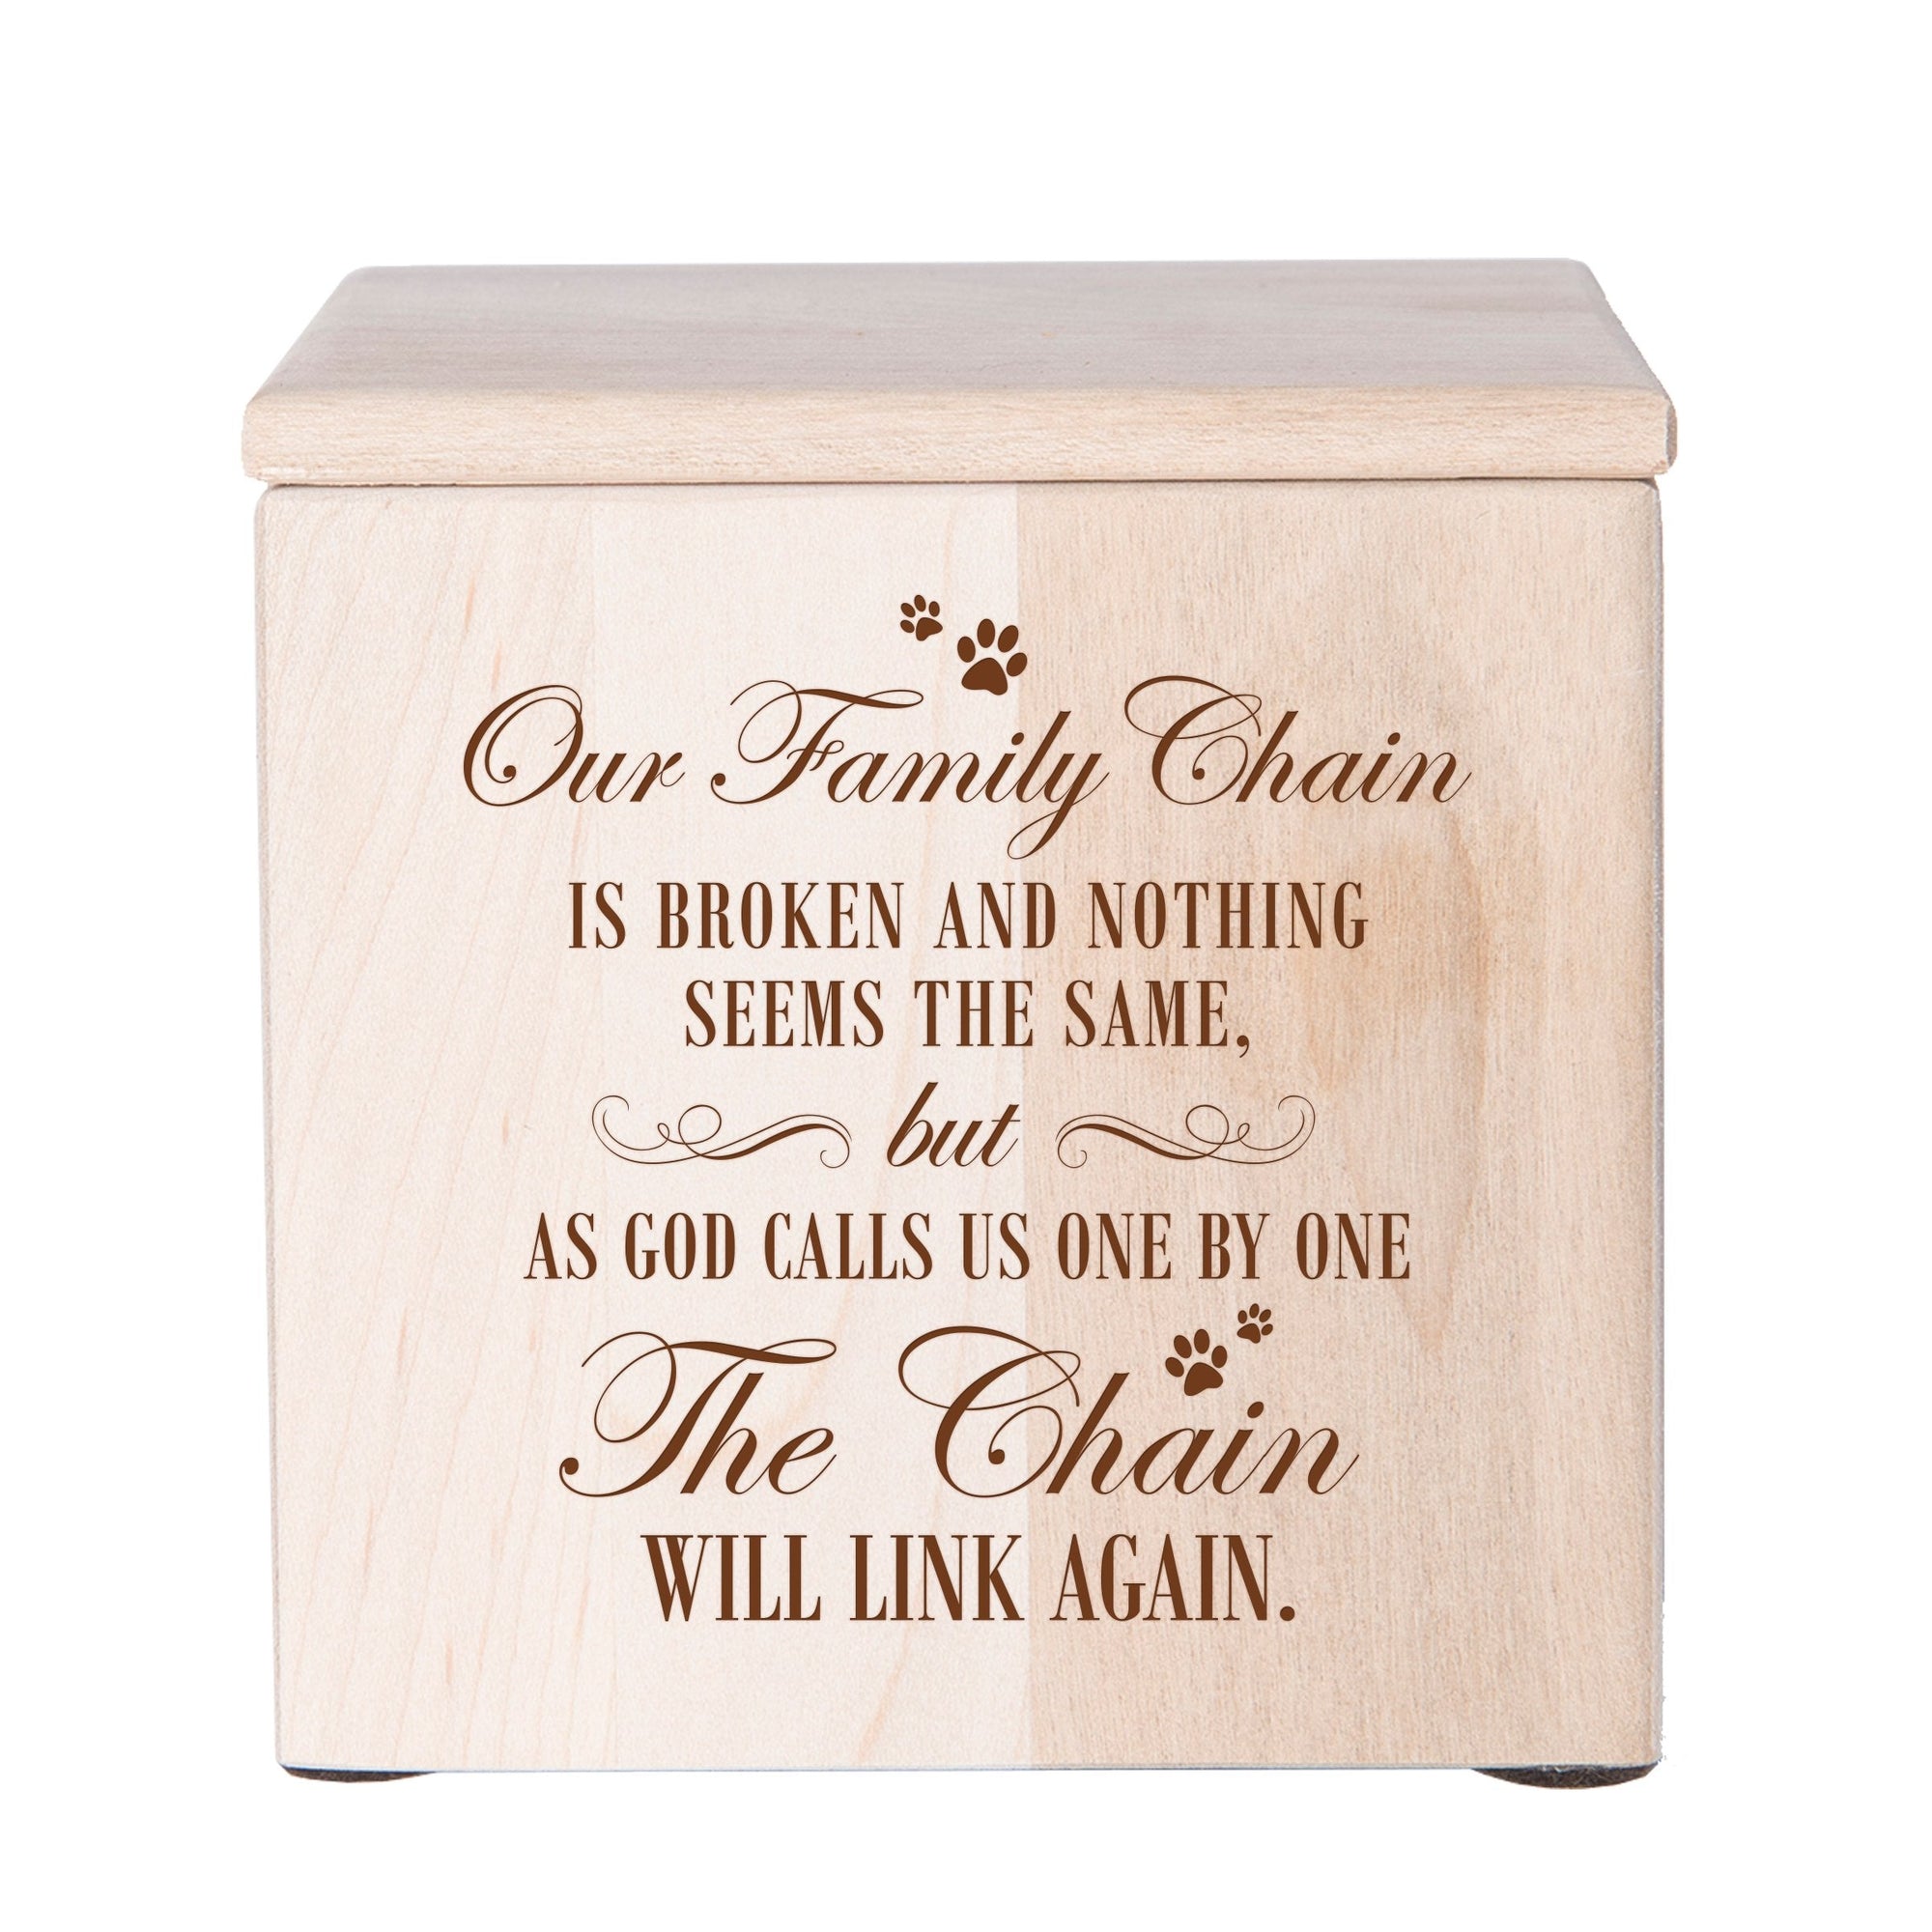 Maple Pet Memorial 3.5x3.5 Keepsake Urn with phrase "Our Family Chain"